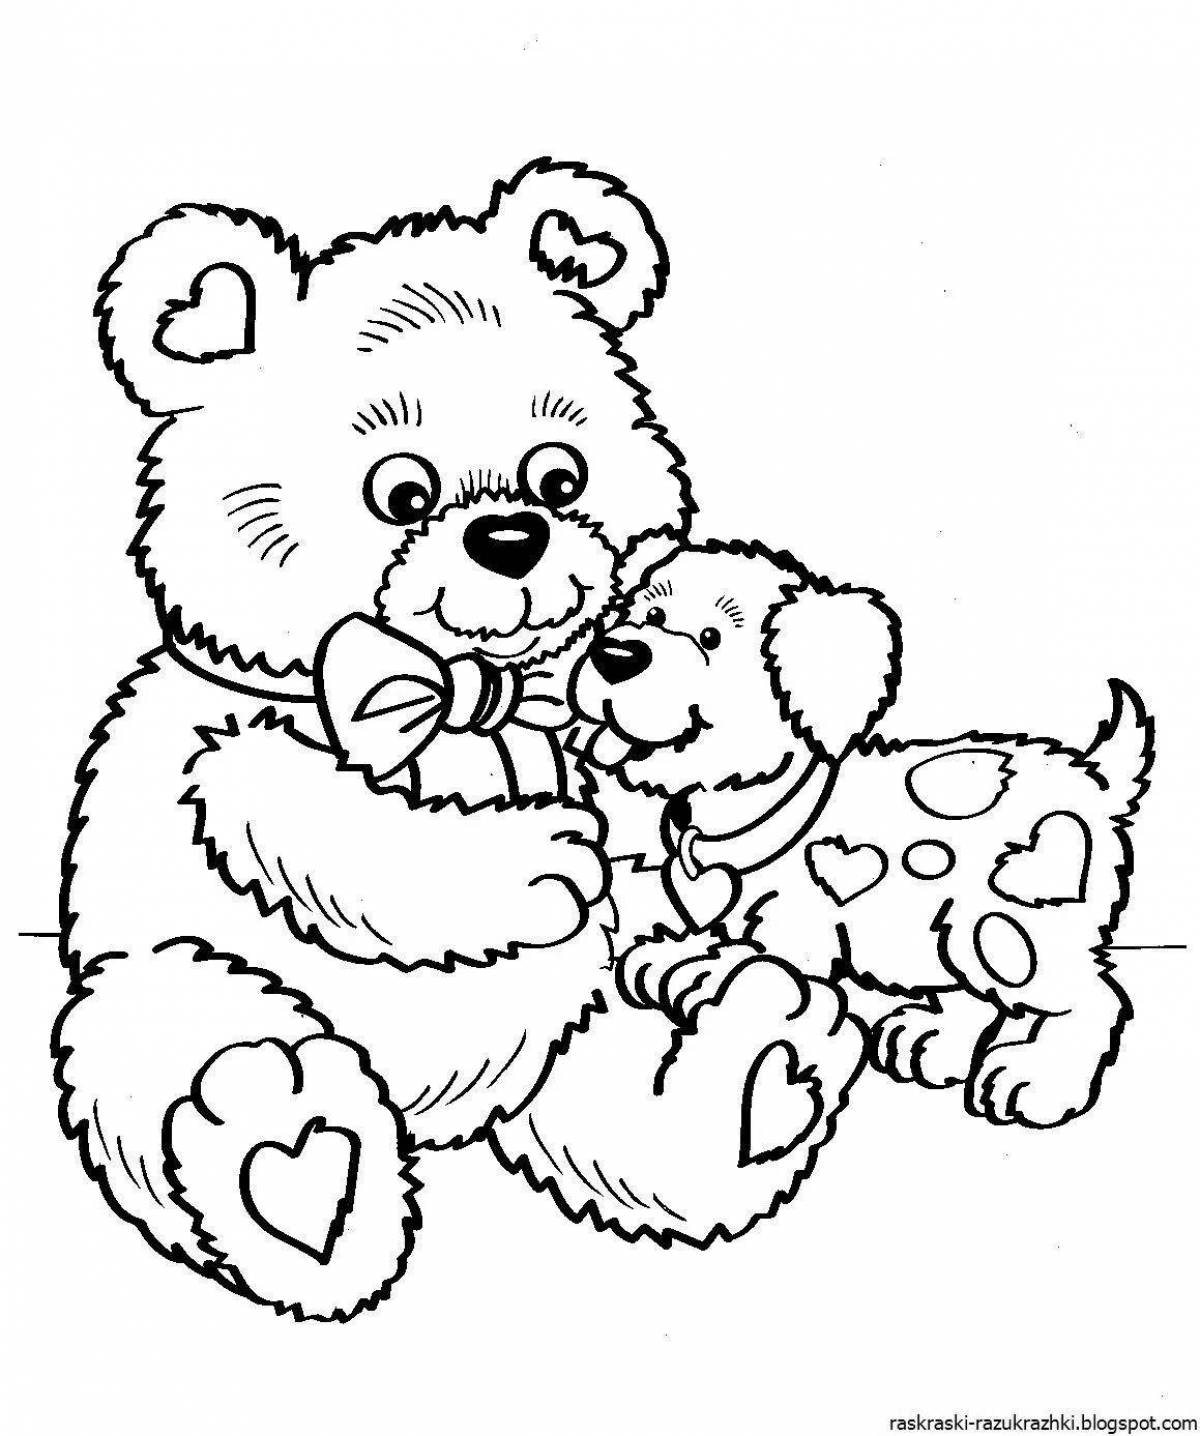 Coloring page wild teddy bear